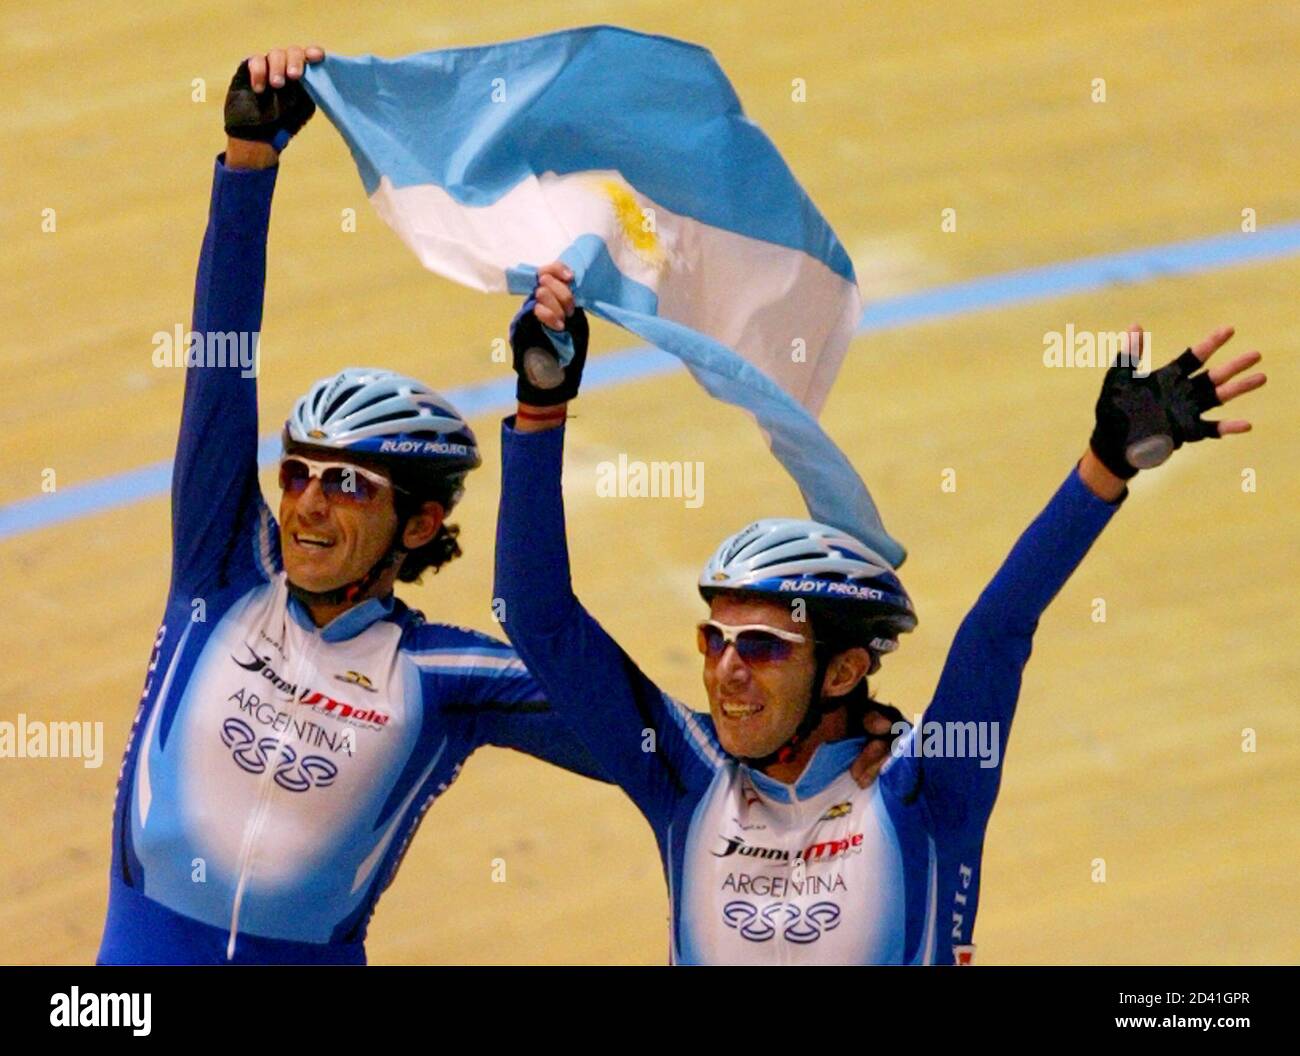 ARGENTINIAN TEAM CELEBRATE WINNING THE MEN'S 50KM MADISON FINAL AT THE  WORLD CHAMPIONSHIPS IN MELBOURNE. Argentina's Juan Esteban Curuchet (L) and  Walter Perez celebrate winning the men's 50 km Madison at the